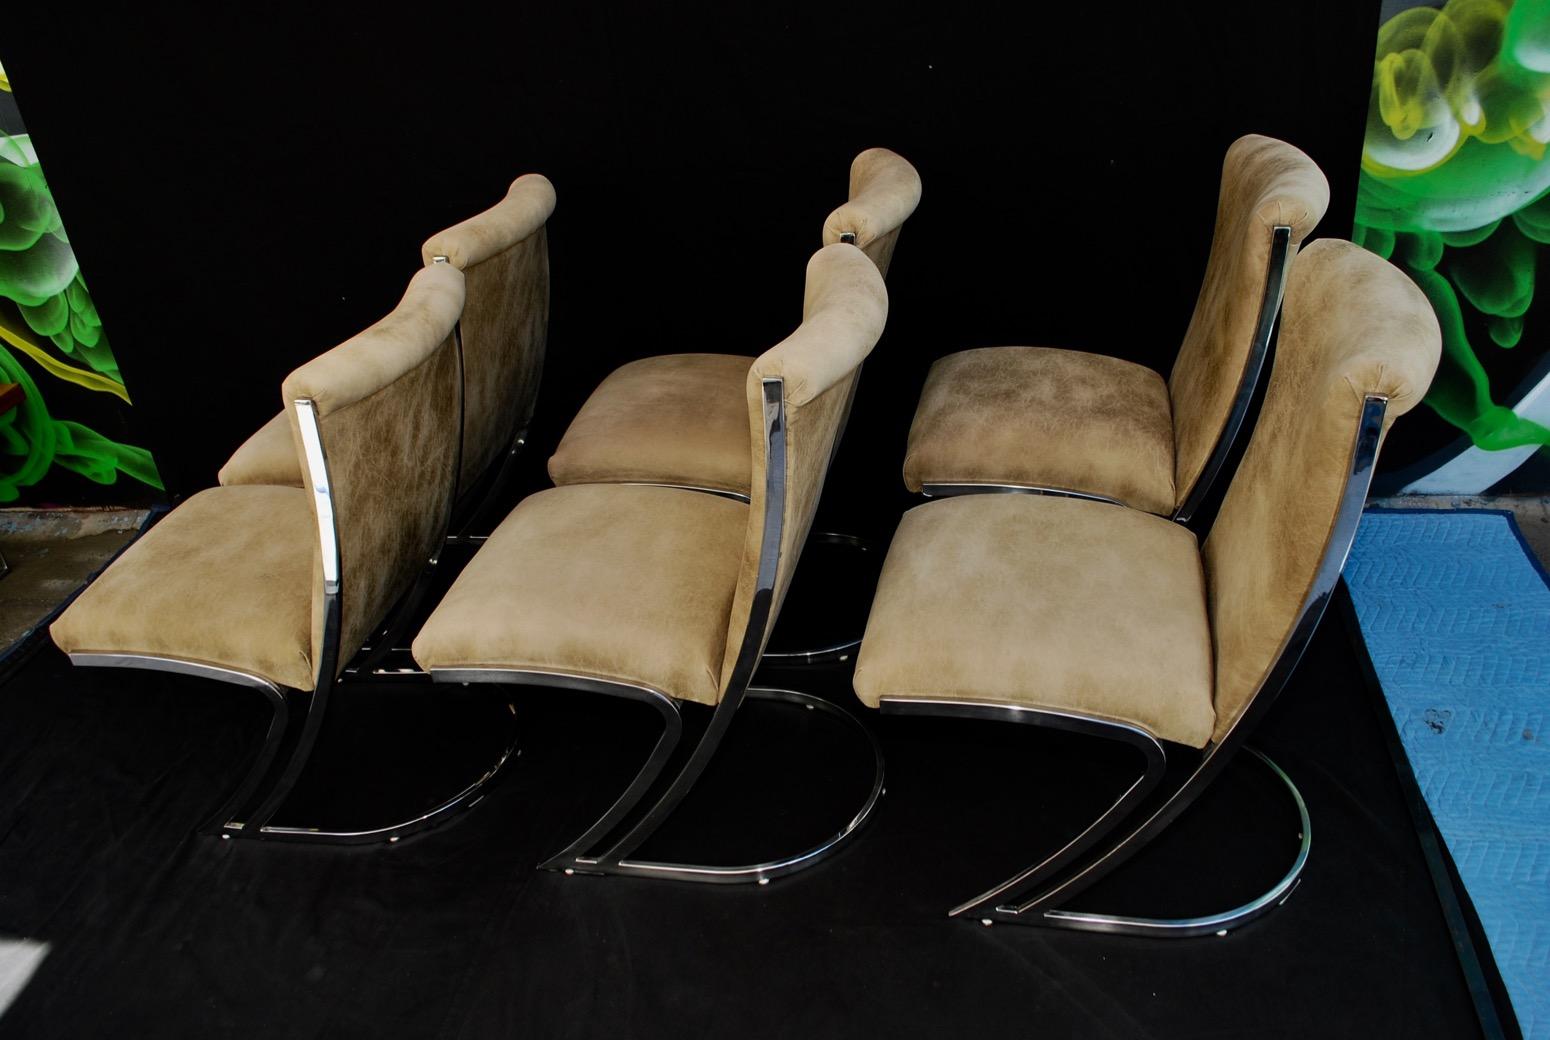 A beautiful and sexy set of six dining room chairs by the iconic Pierre Cardin, they are made with original suede leather, it is very soft, the chairs are comfortable, if I did not have a two years old son who would destroy them, I would have kept